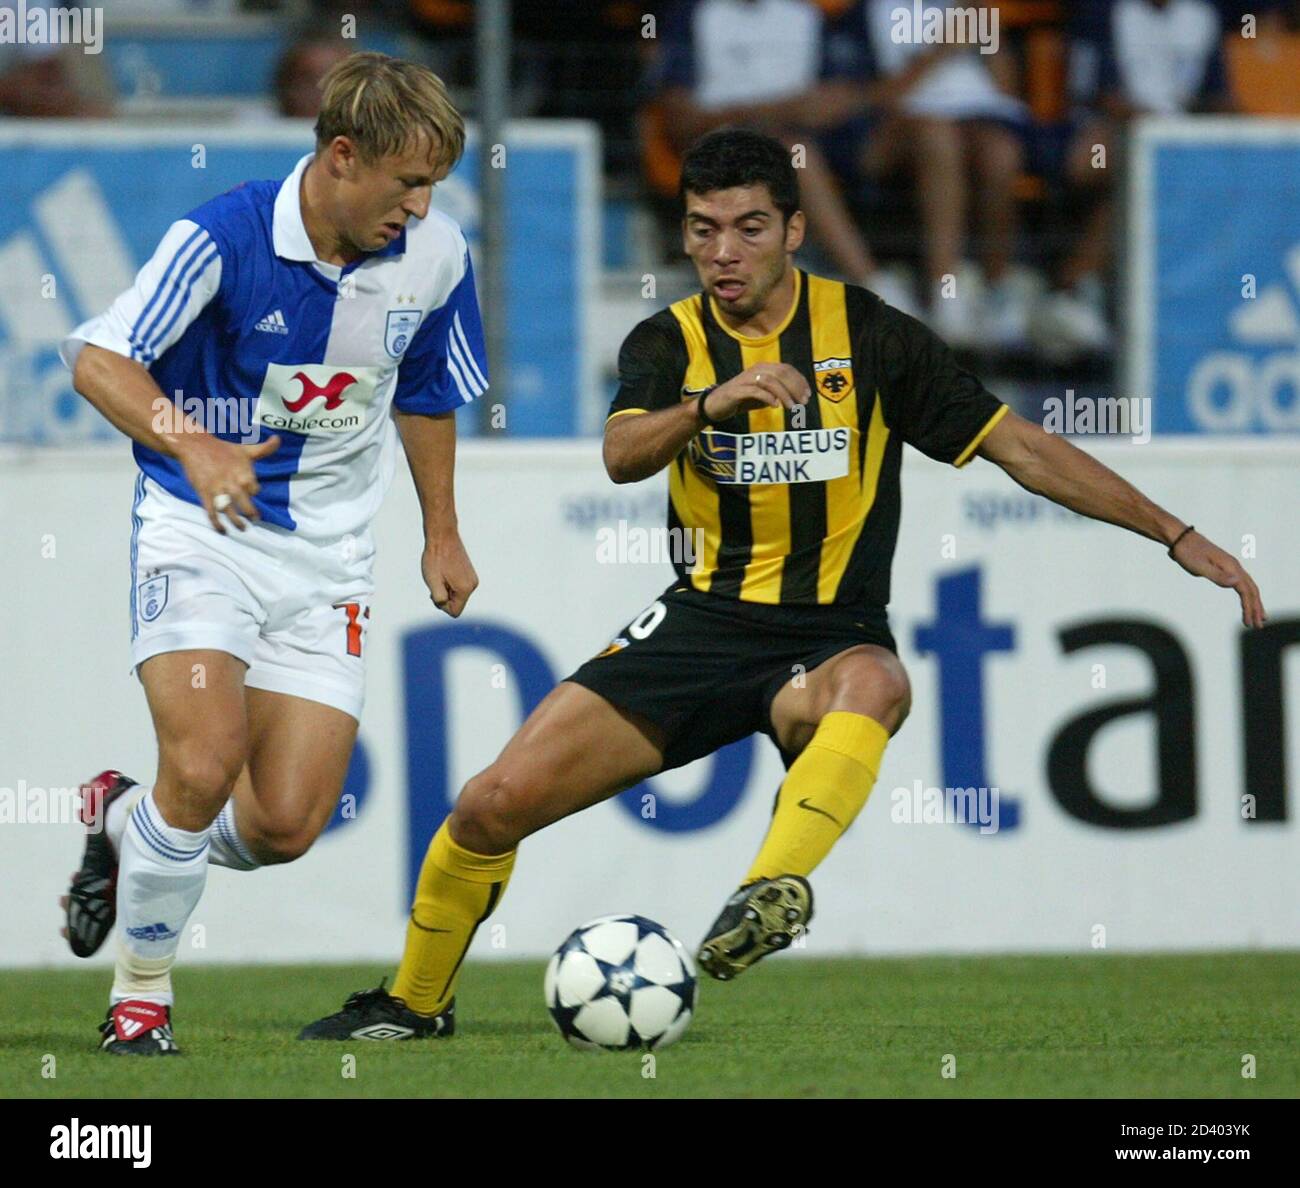 Grasshopper-Club Zurich Christoph Spycher (L) fights with AEK Athens  Vasilis Tsiartas (L) for the ball during their Champions League third round  first leg qualifyer in Zurich, August 13, 2003. REUTERS/Andreas Meier RS/AA